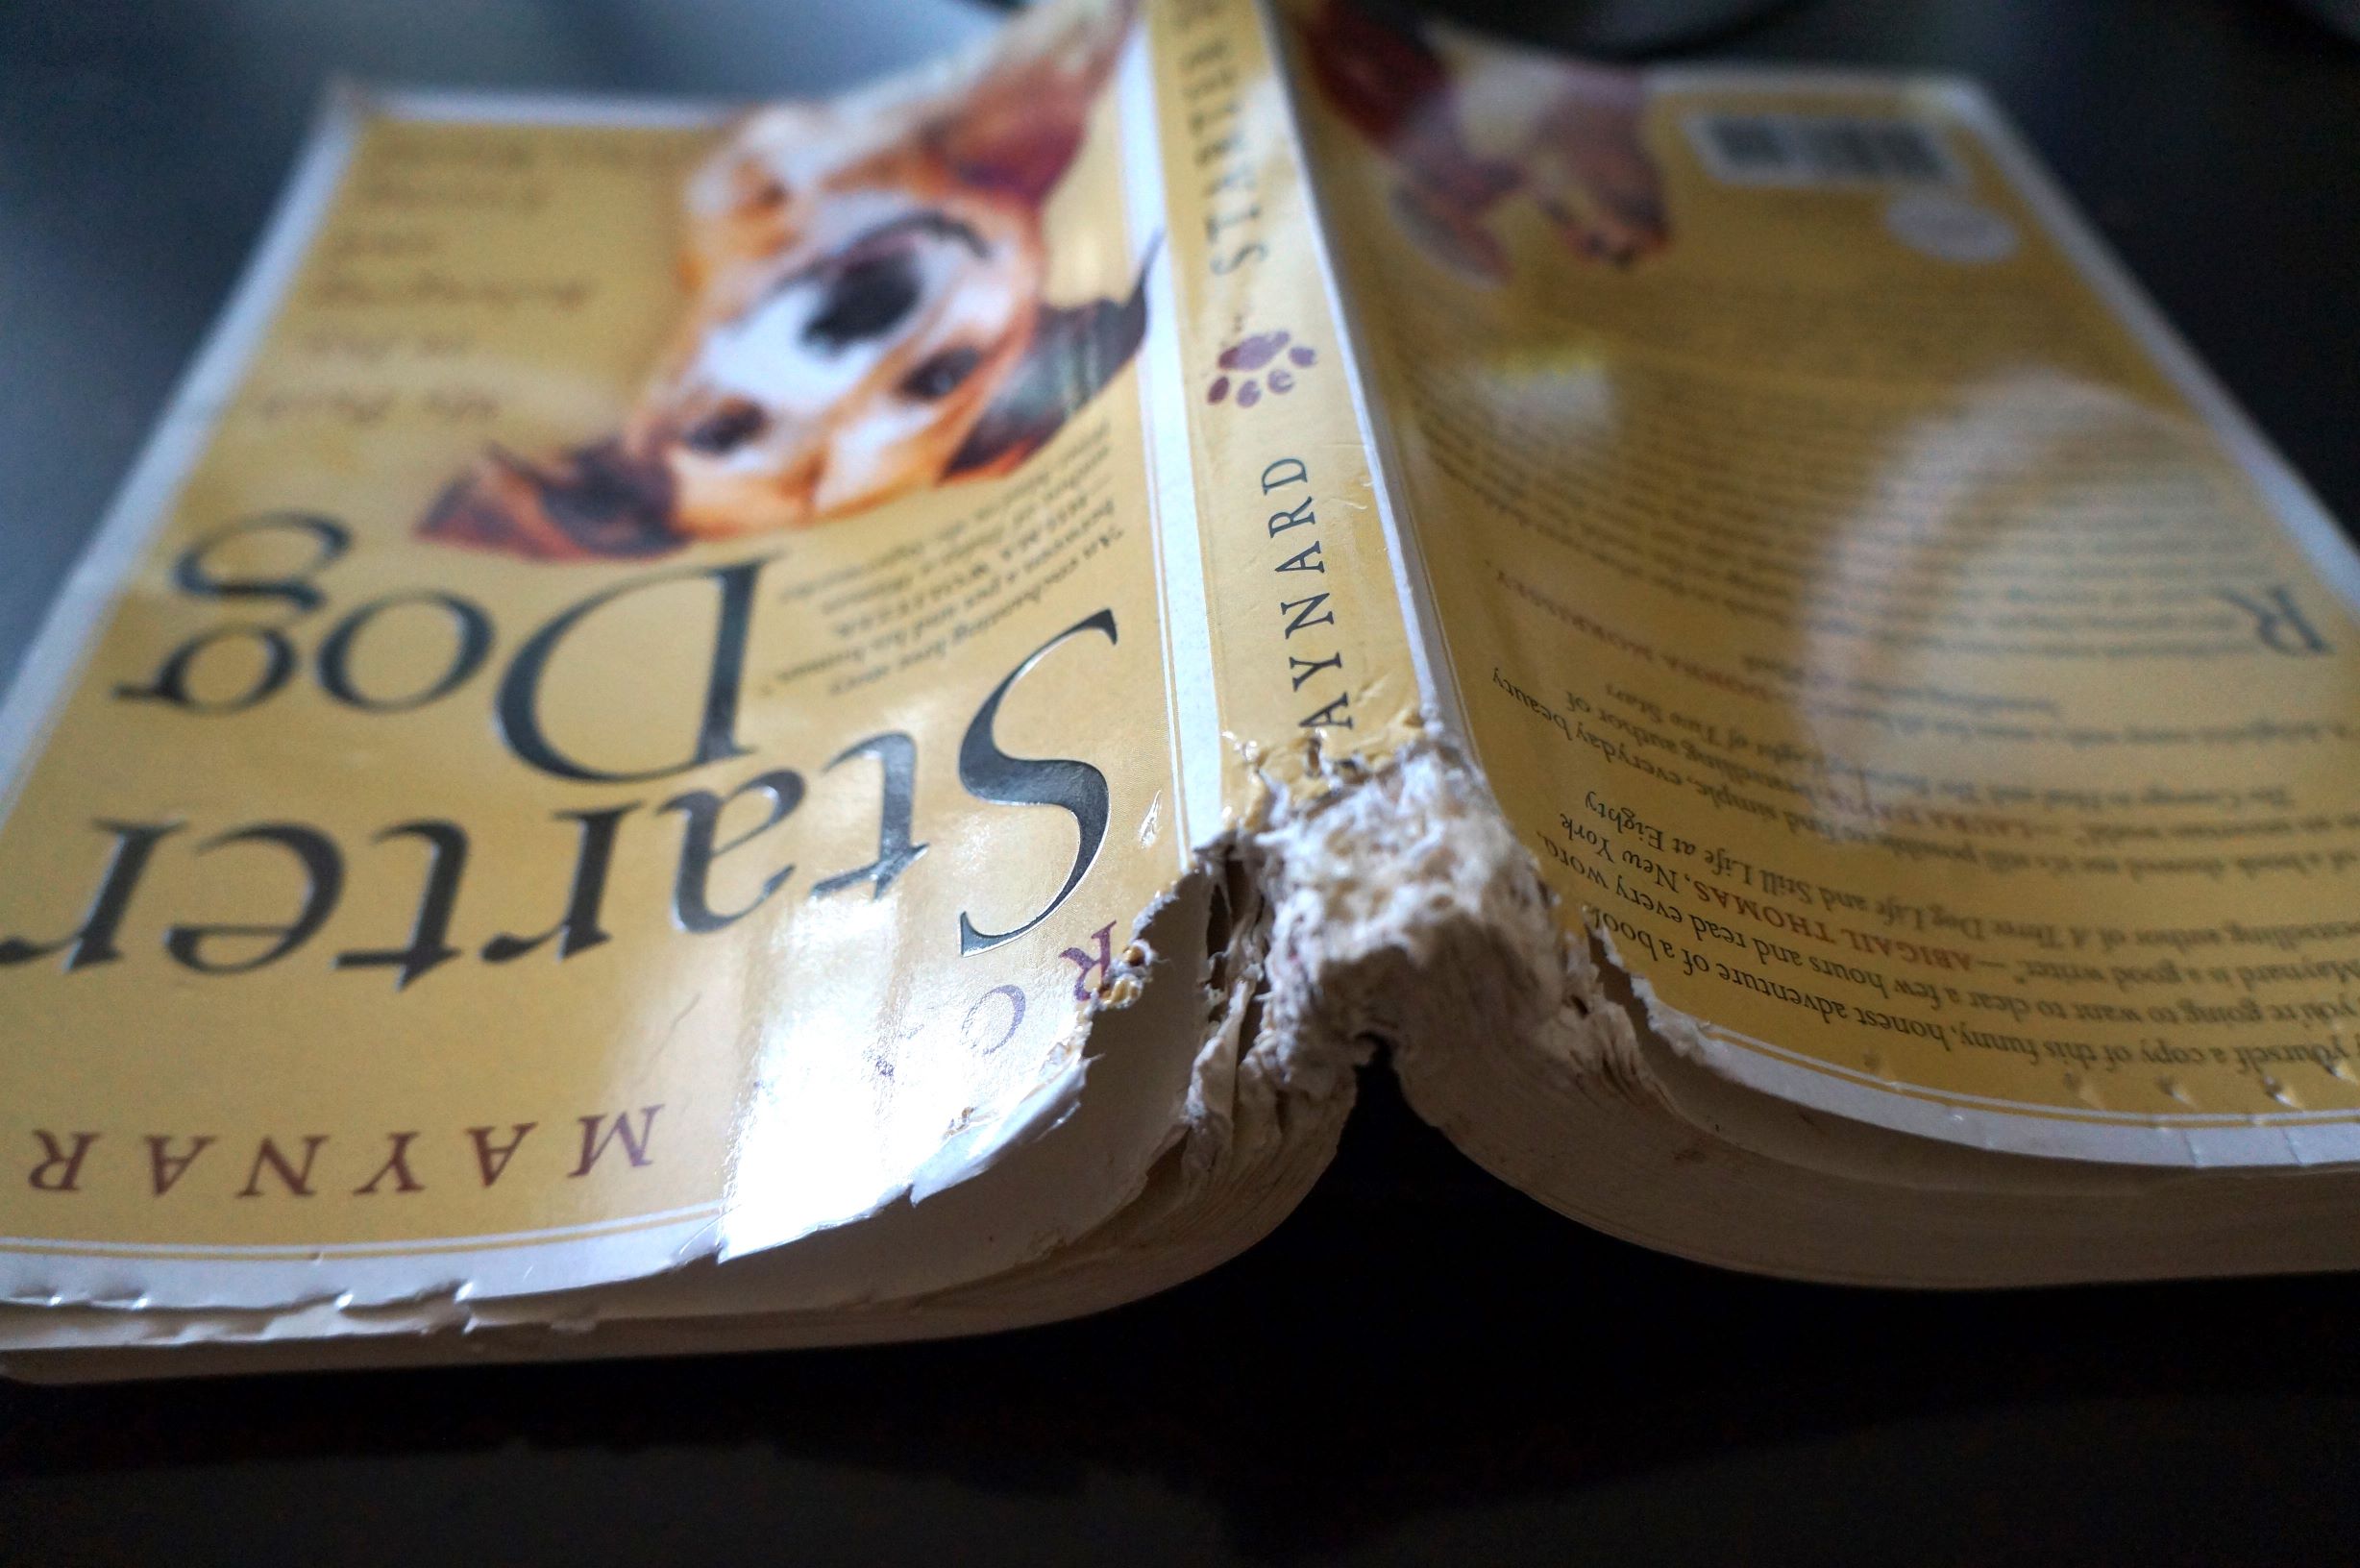 Starter Dog book review image -- the book is open pages down with the cover upside down and the top edge of the binding chewed on by a dog